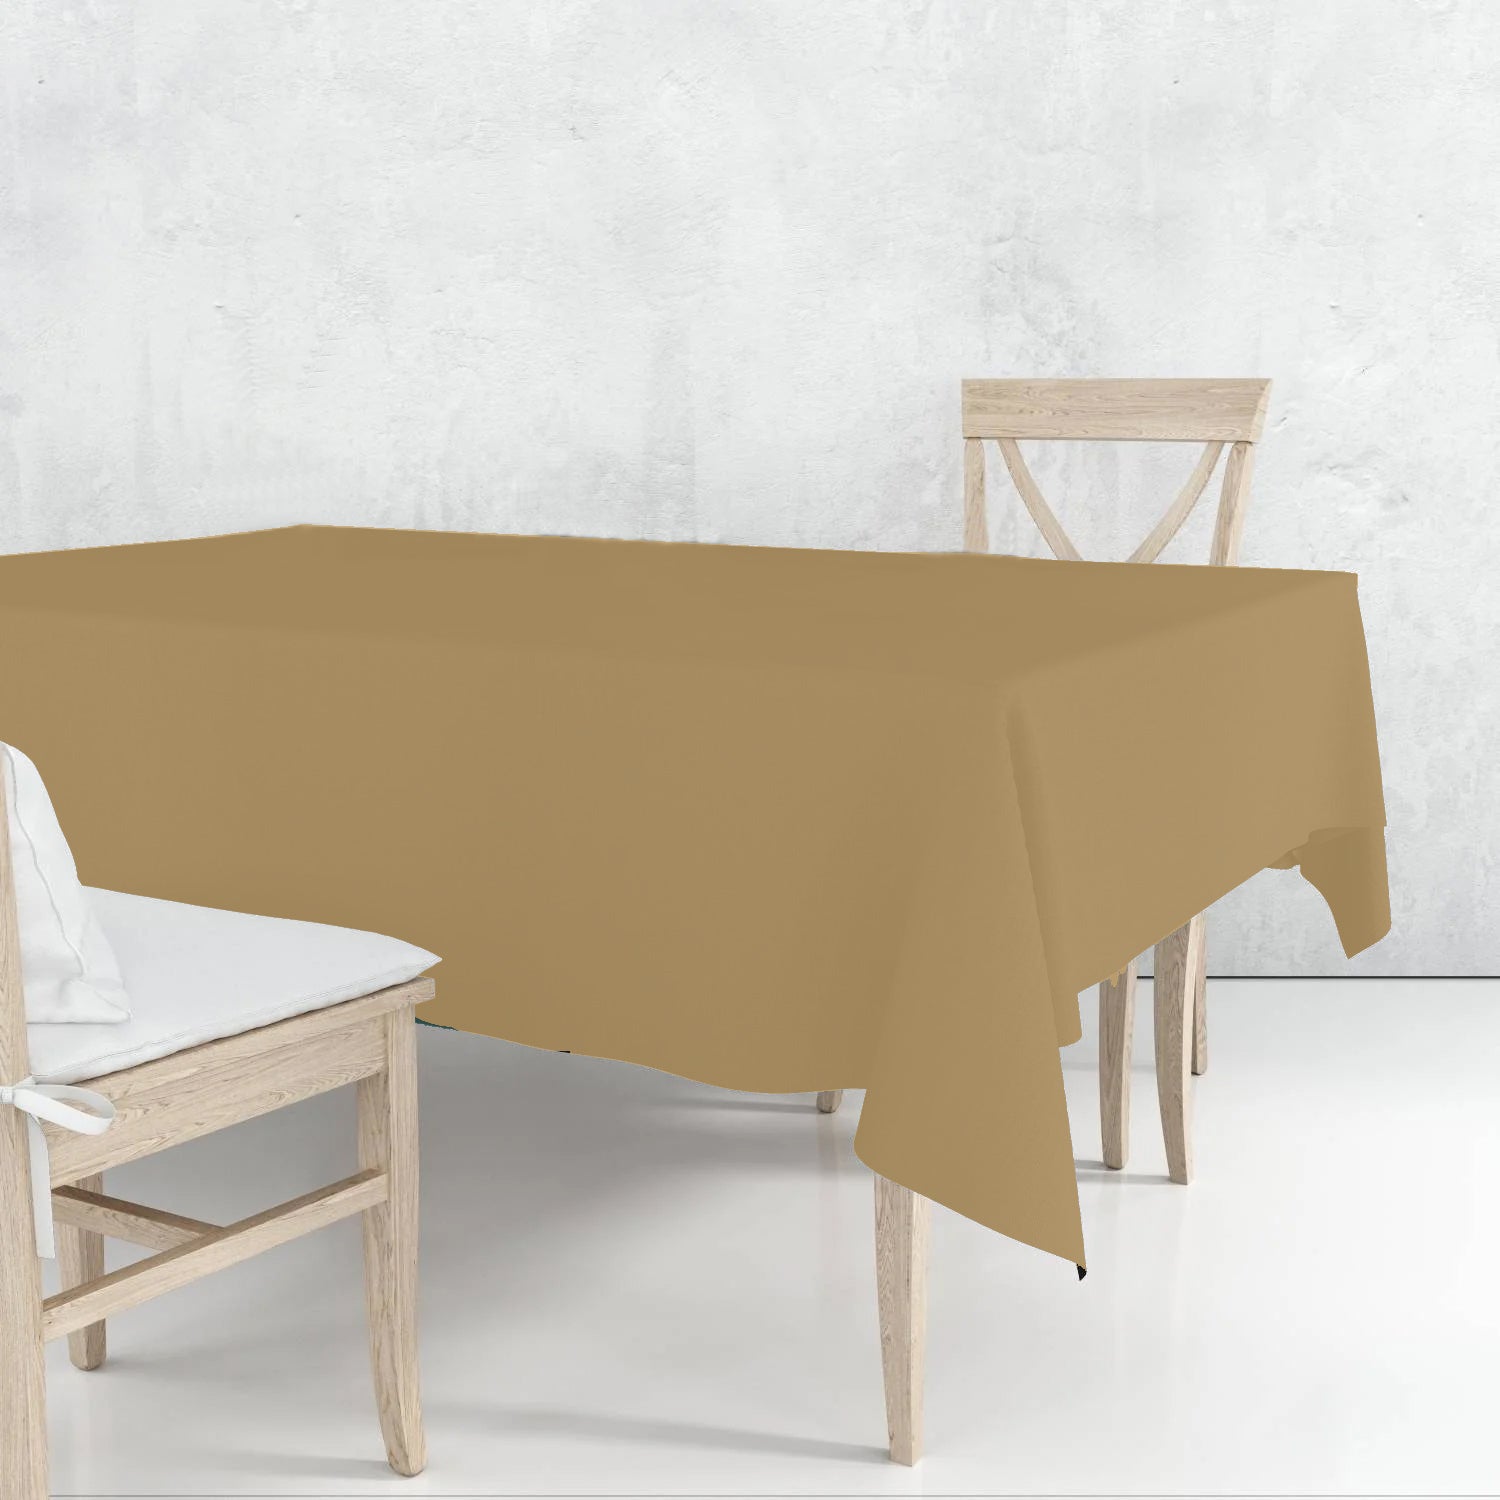 Disposable Plastic Premium Tablecloth Heavyweight Rectangle Gold Lace 54" x 108" Tablesettings Nicole Fantini Collection   